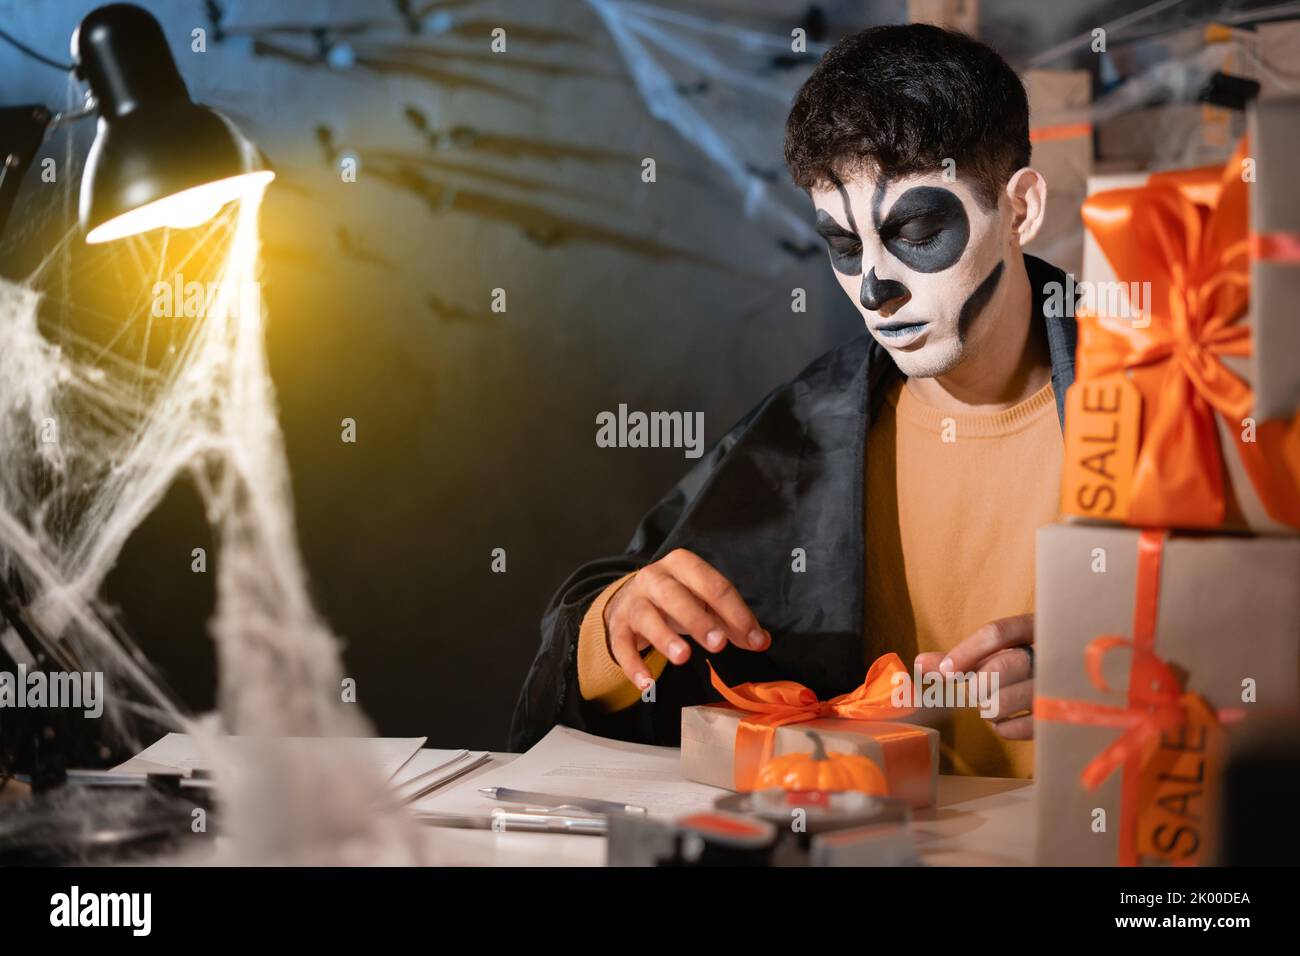 Successful small business owner, freelance makeup artist skeleton preparing package for delivery to customers, small and medium business entrepreneurs Stock Photo